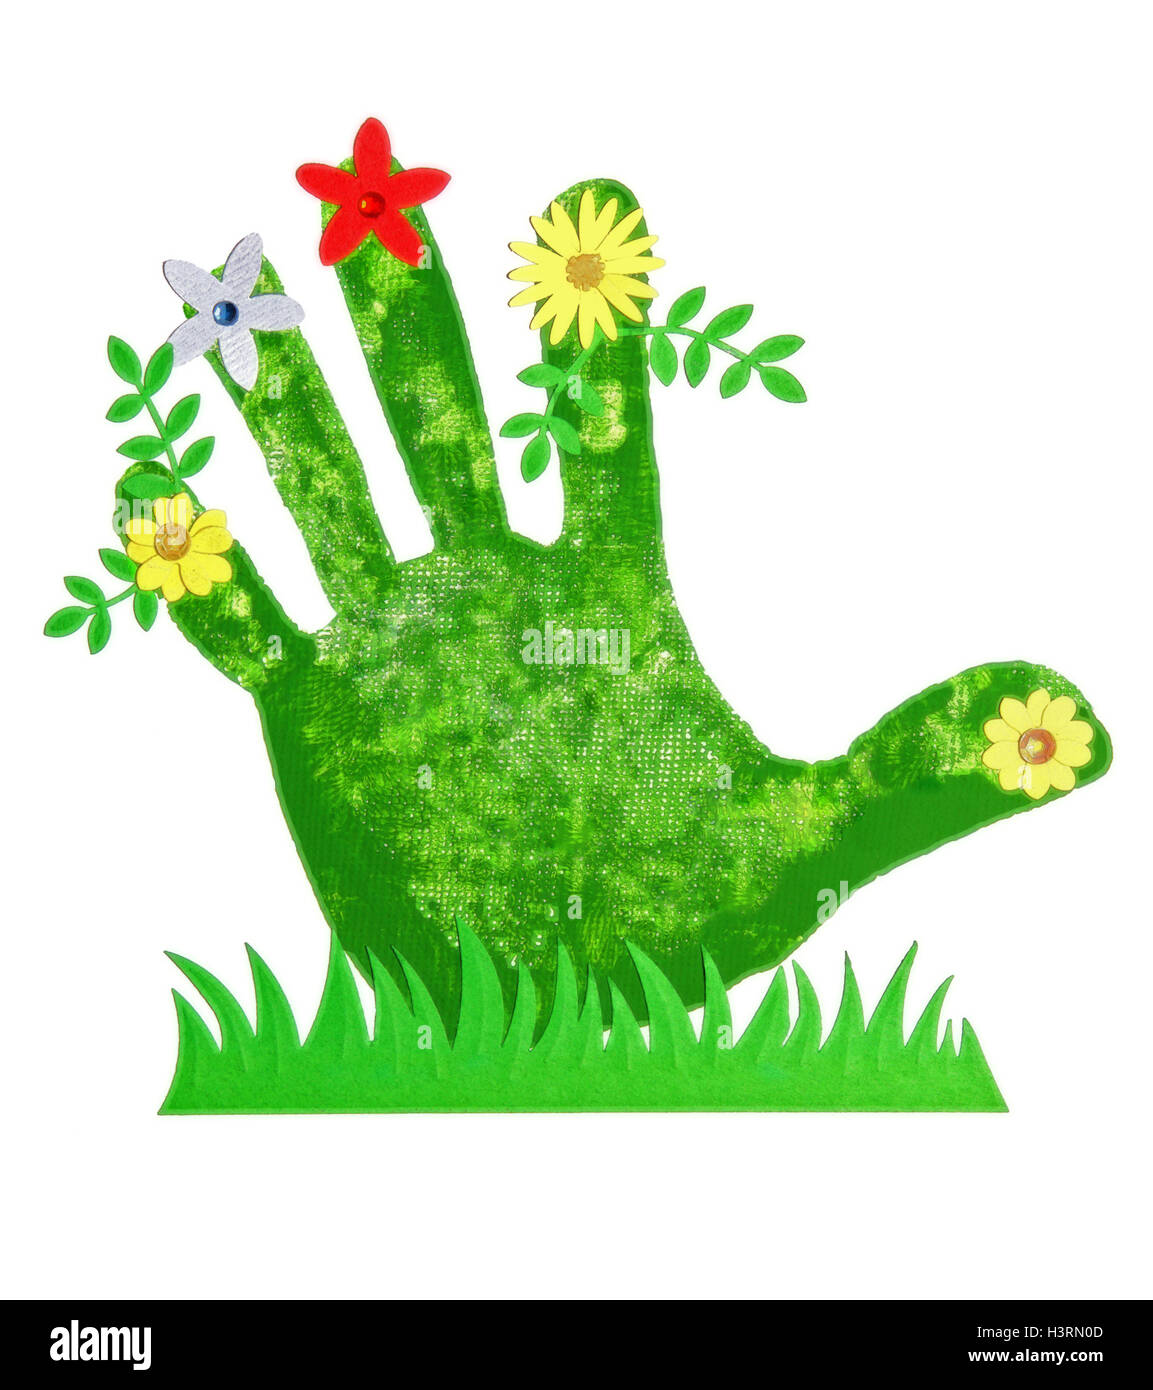 Drawing of a hand with flowers and grass.  Concept for keeping nature green and healthy. Stock Photo